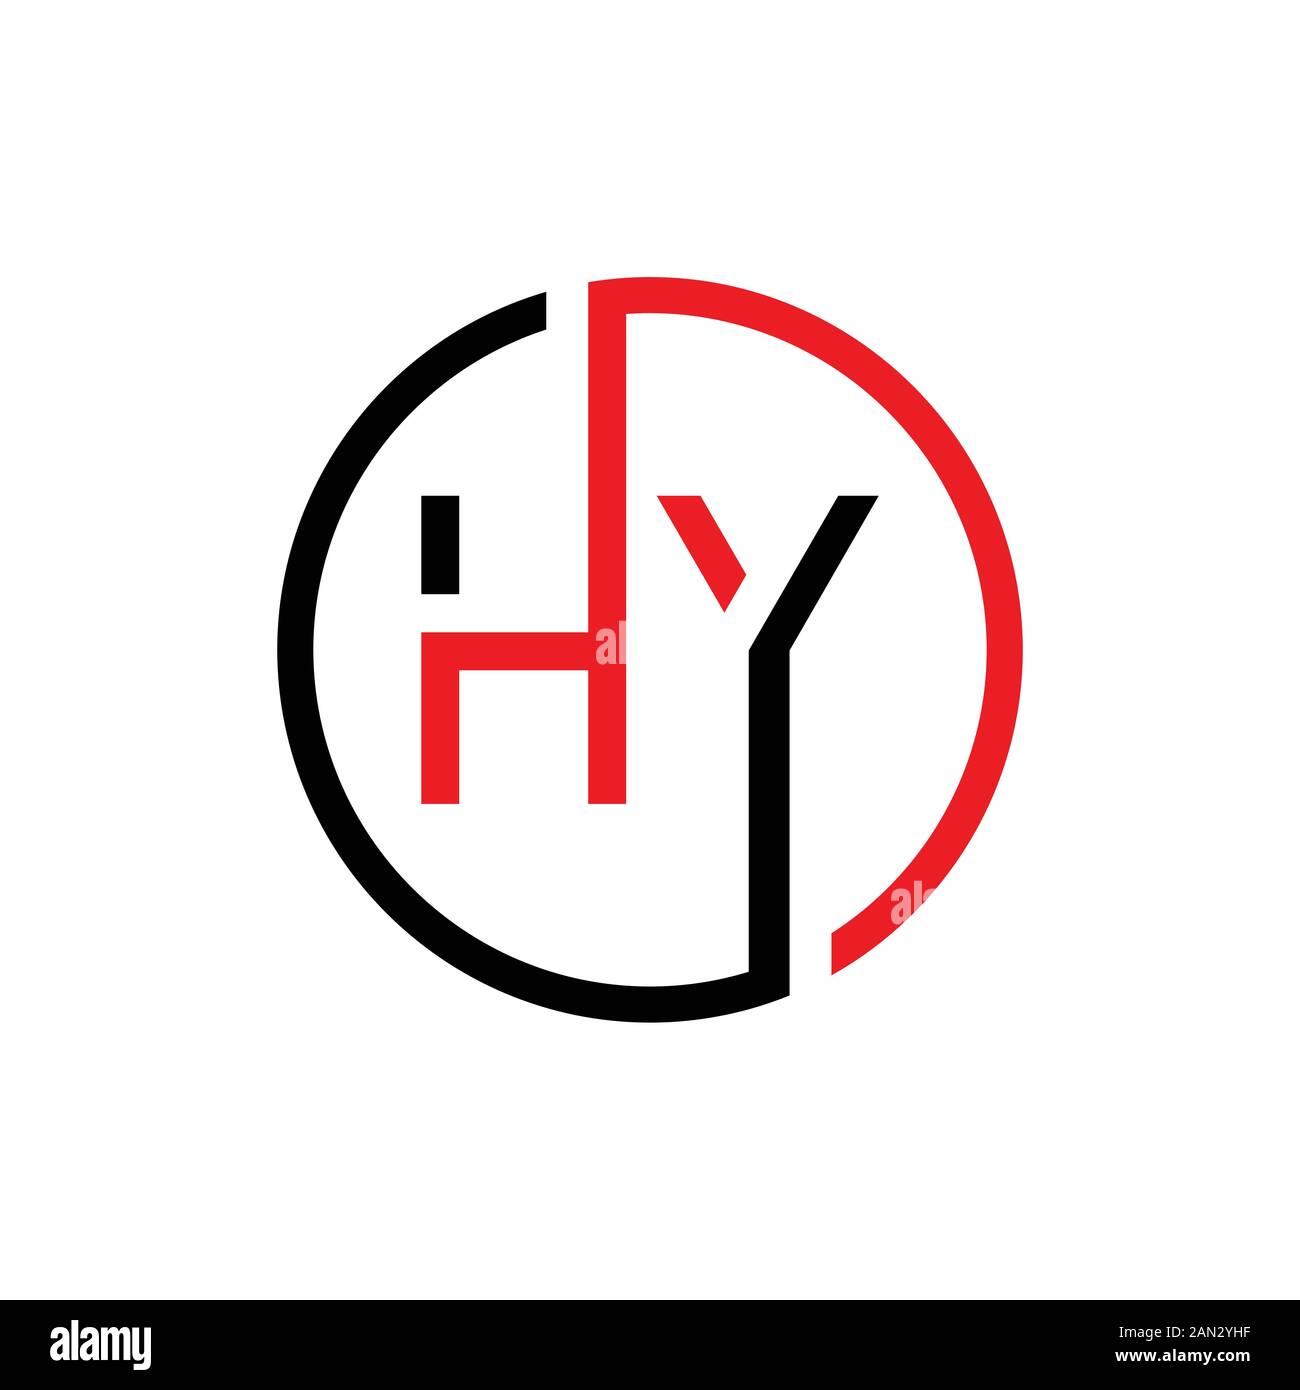 letter HY Logo Design Linked Vector Template With Red And Black. Initial HY Vector Illustration Stock Vector